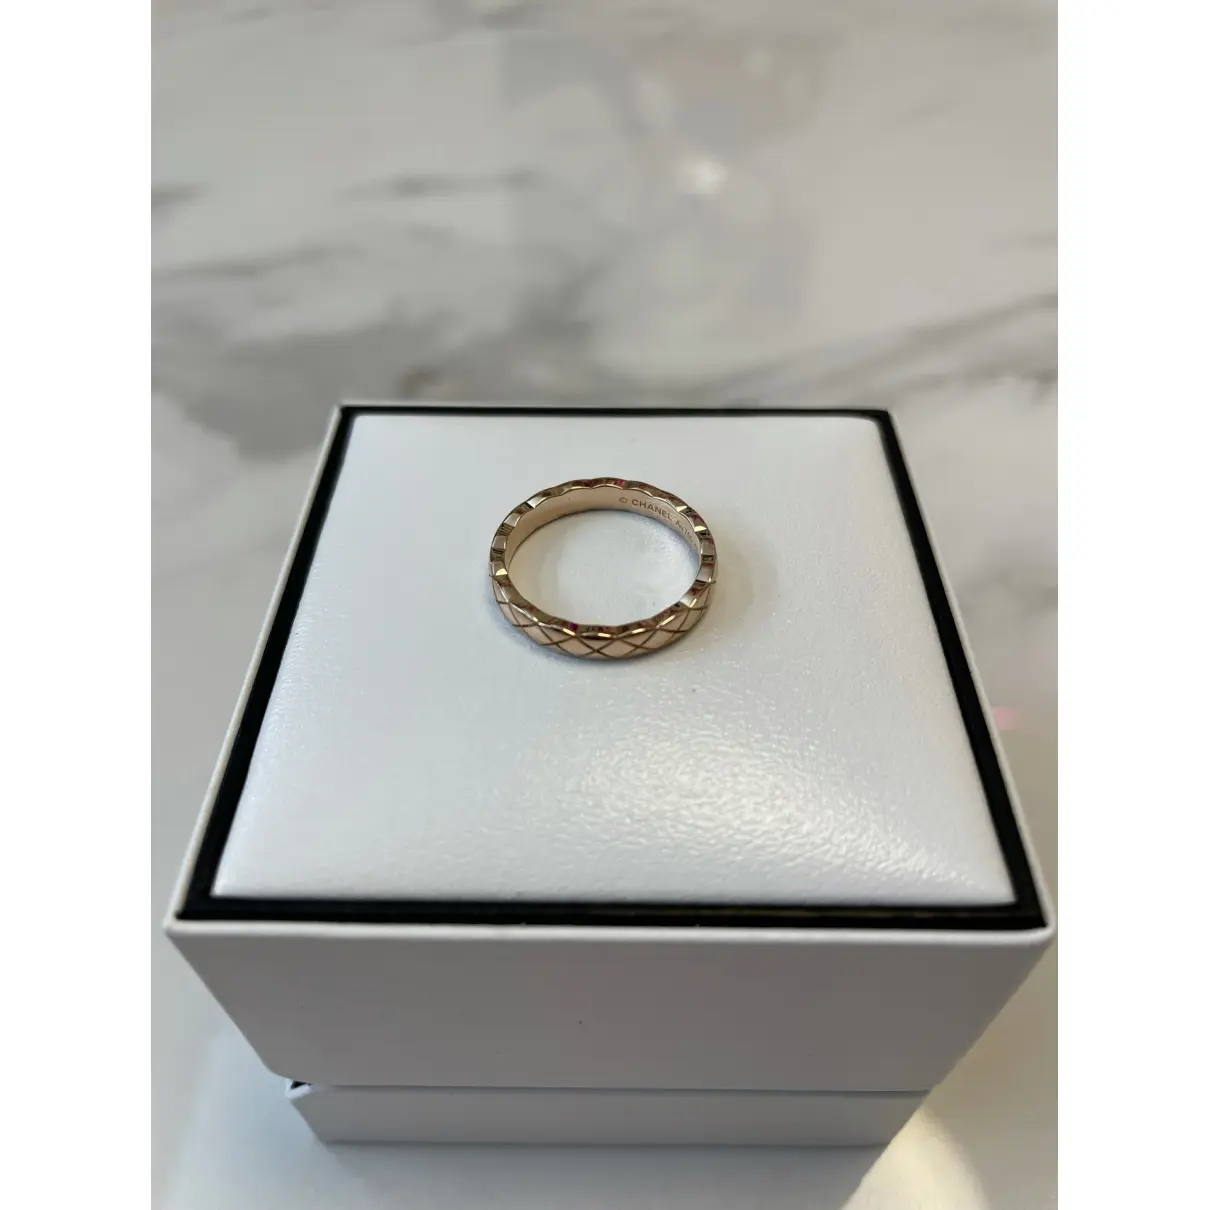 Buy Chanel Coco Crush ring online